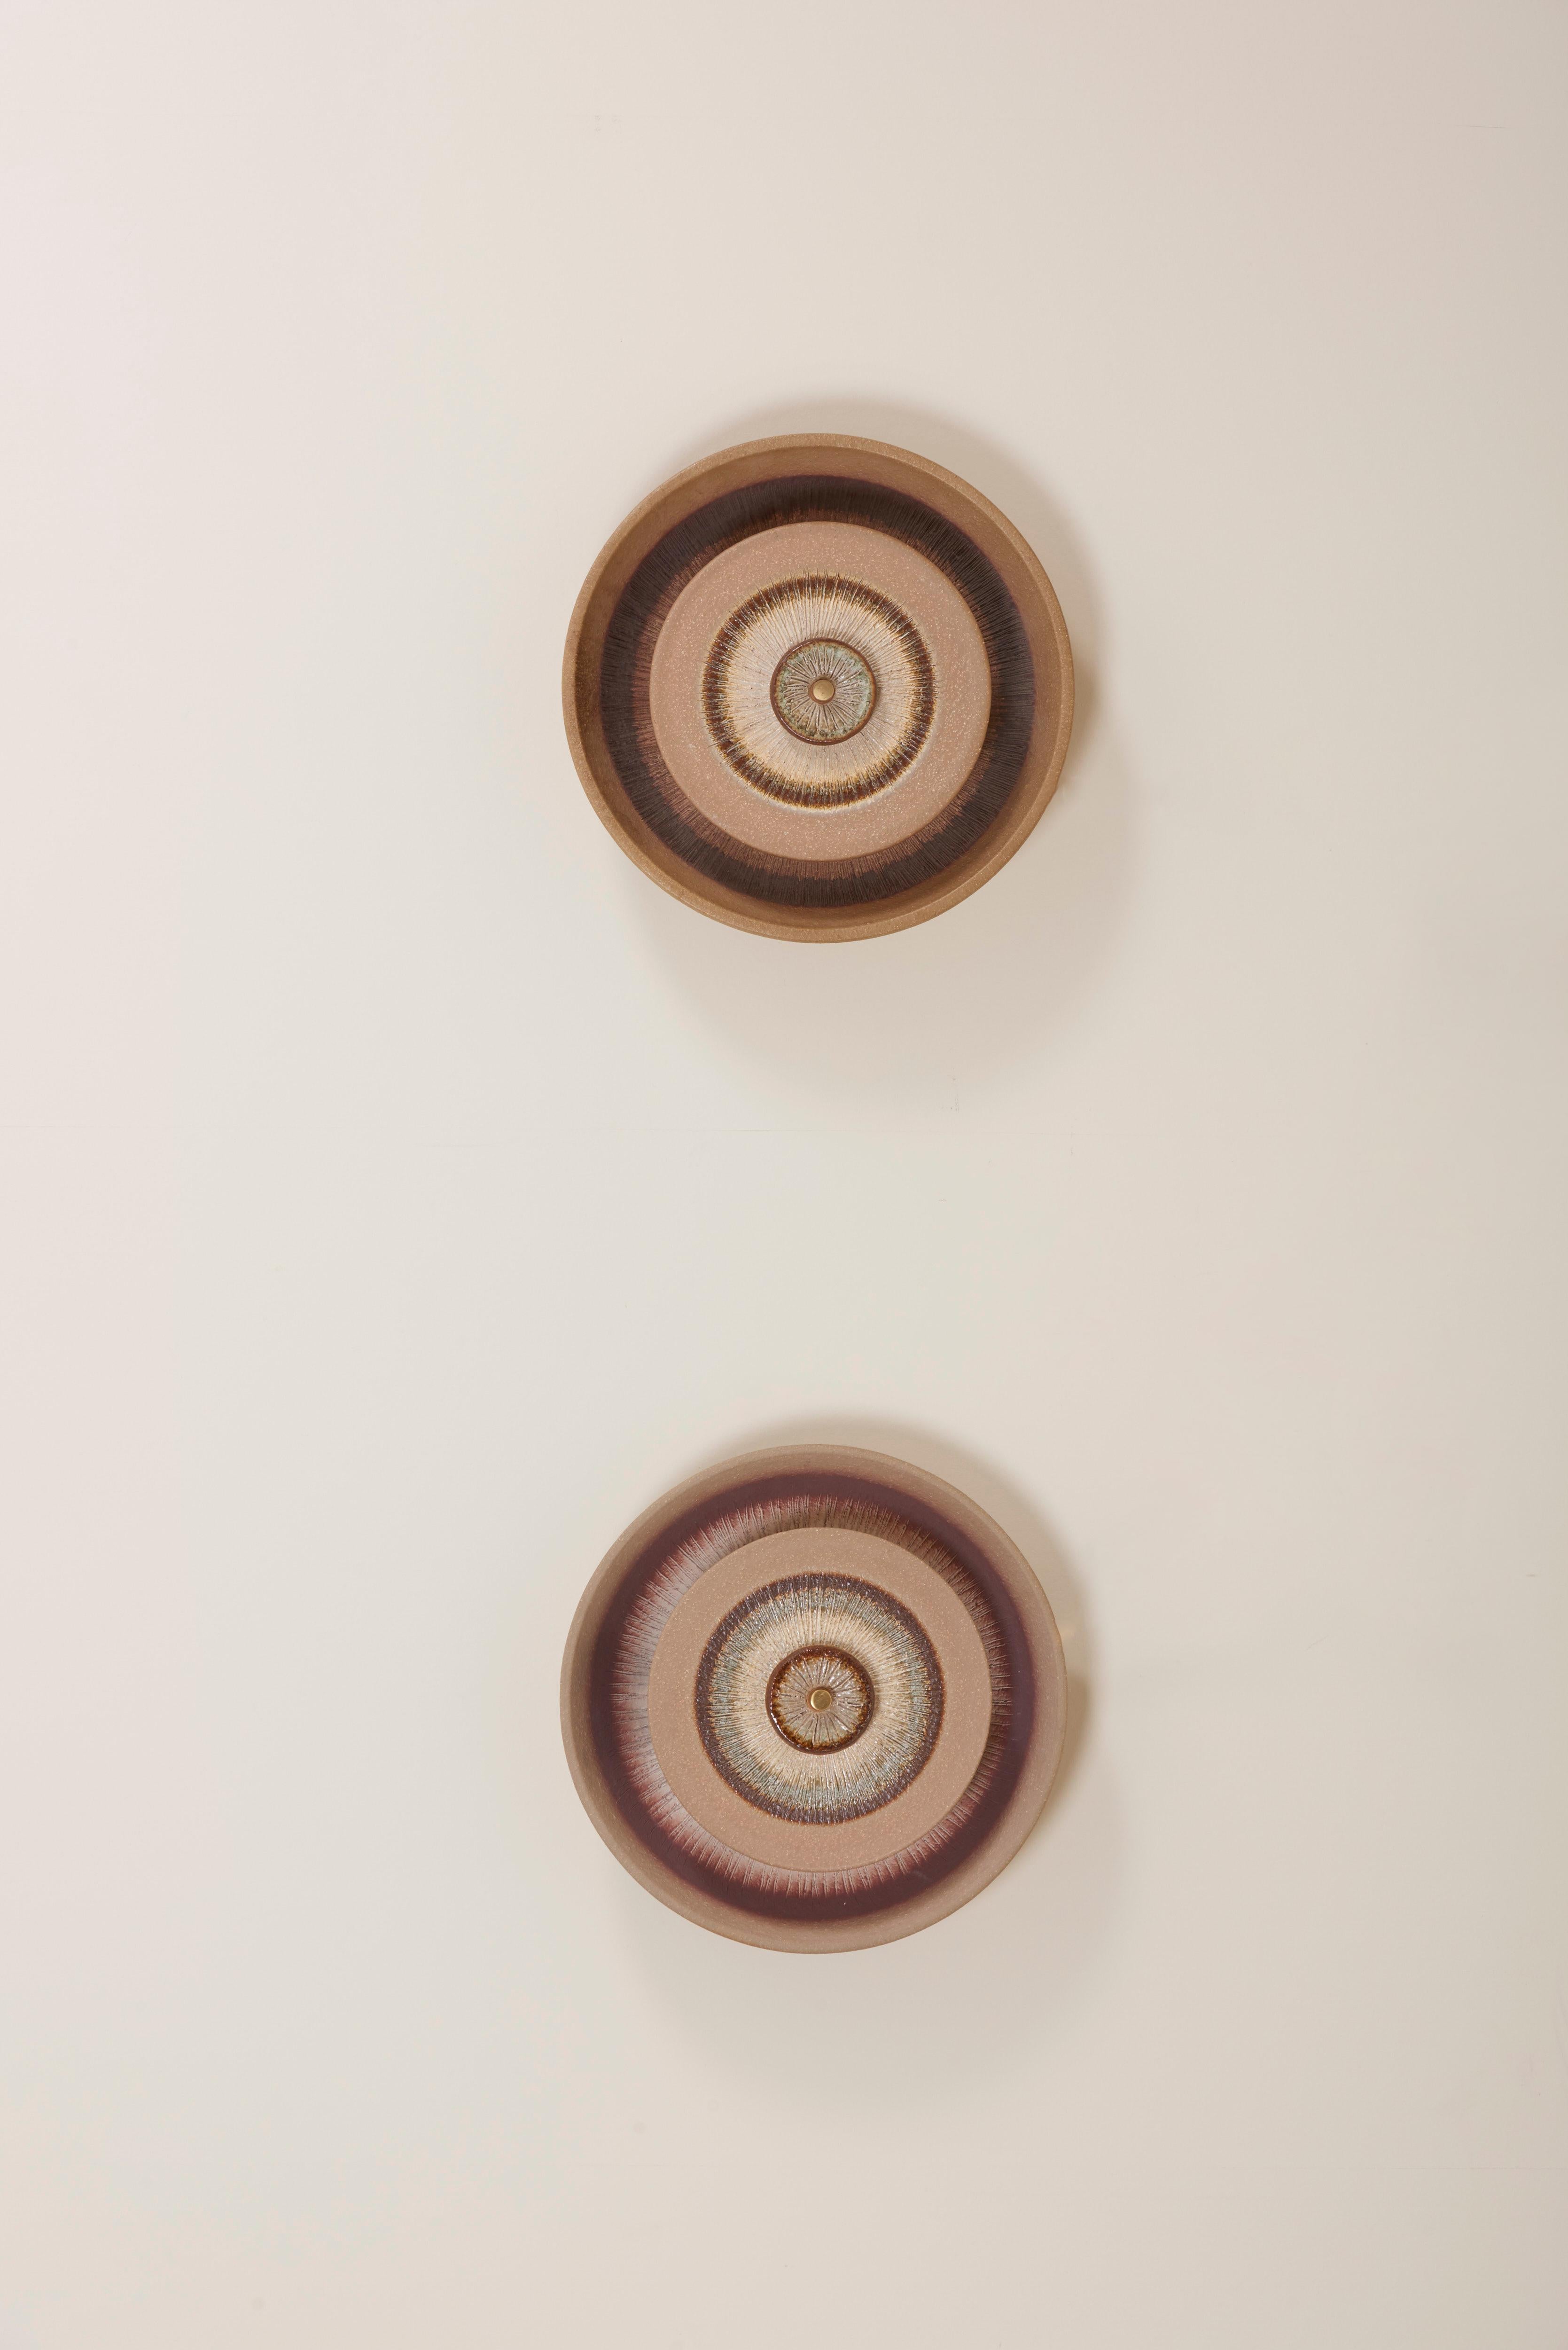 Pair of Danish ceramic wall lights from the 1960s designed by Noomi Backhausen & Poul Brandborg for Søholm, Scandinavian Style. The lights consist of ceramic discs with a back light. 1 x E14 bulb each.

To be on the safe side, the lamps should be